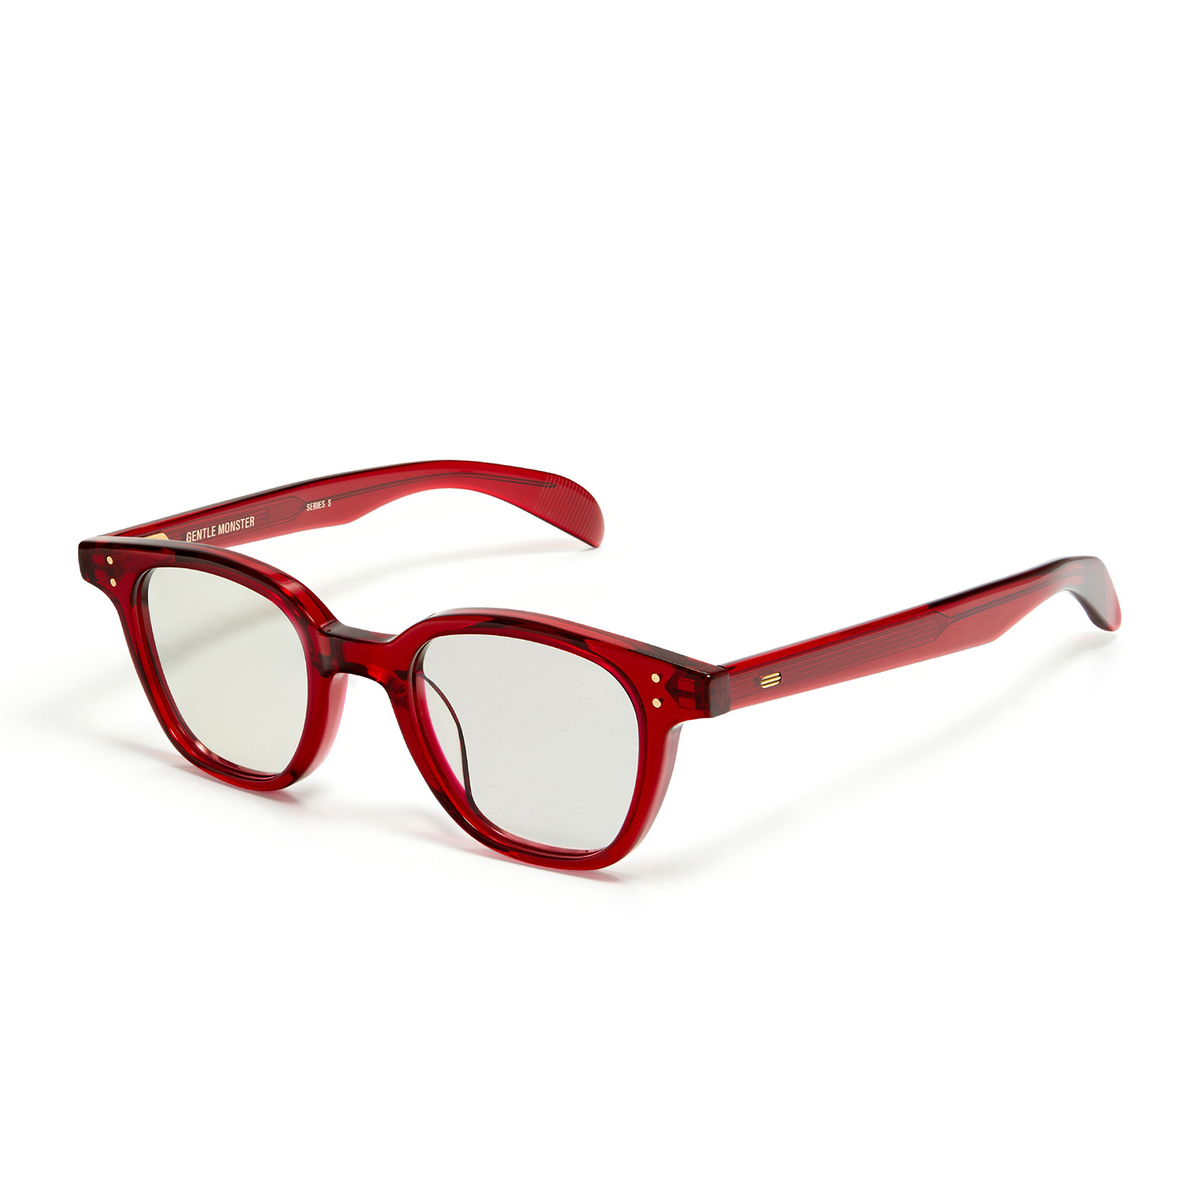 Gentle Monster® Square Eyeglasses: Dadio color Red RC1 - three-quarters view.